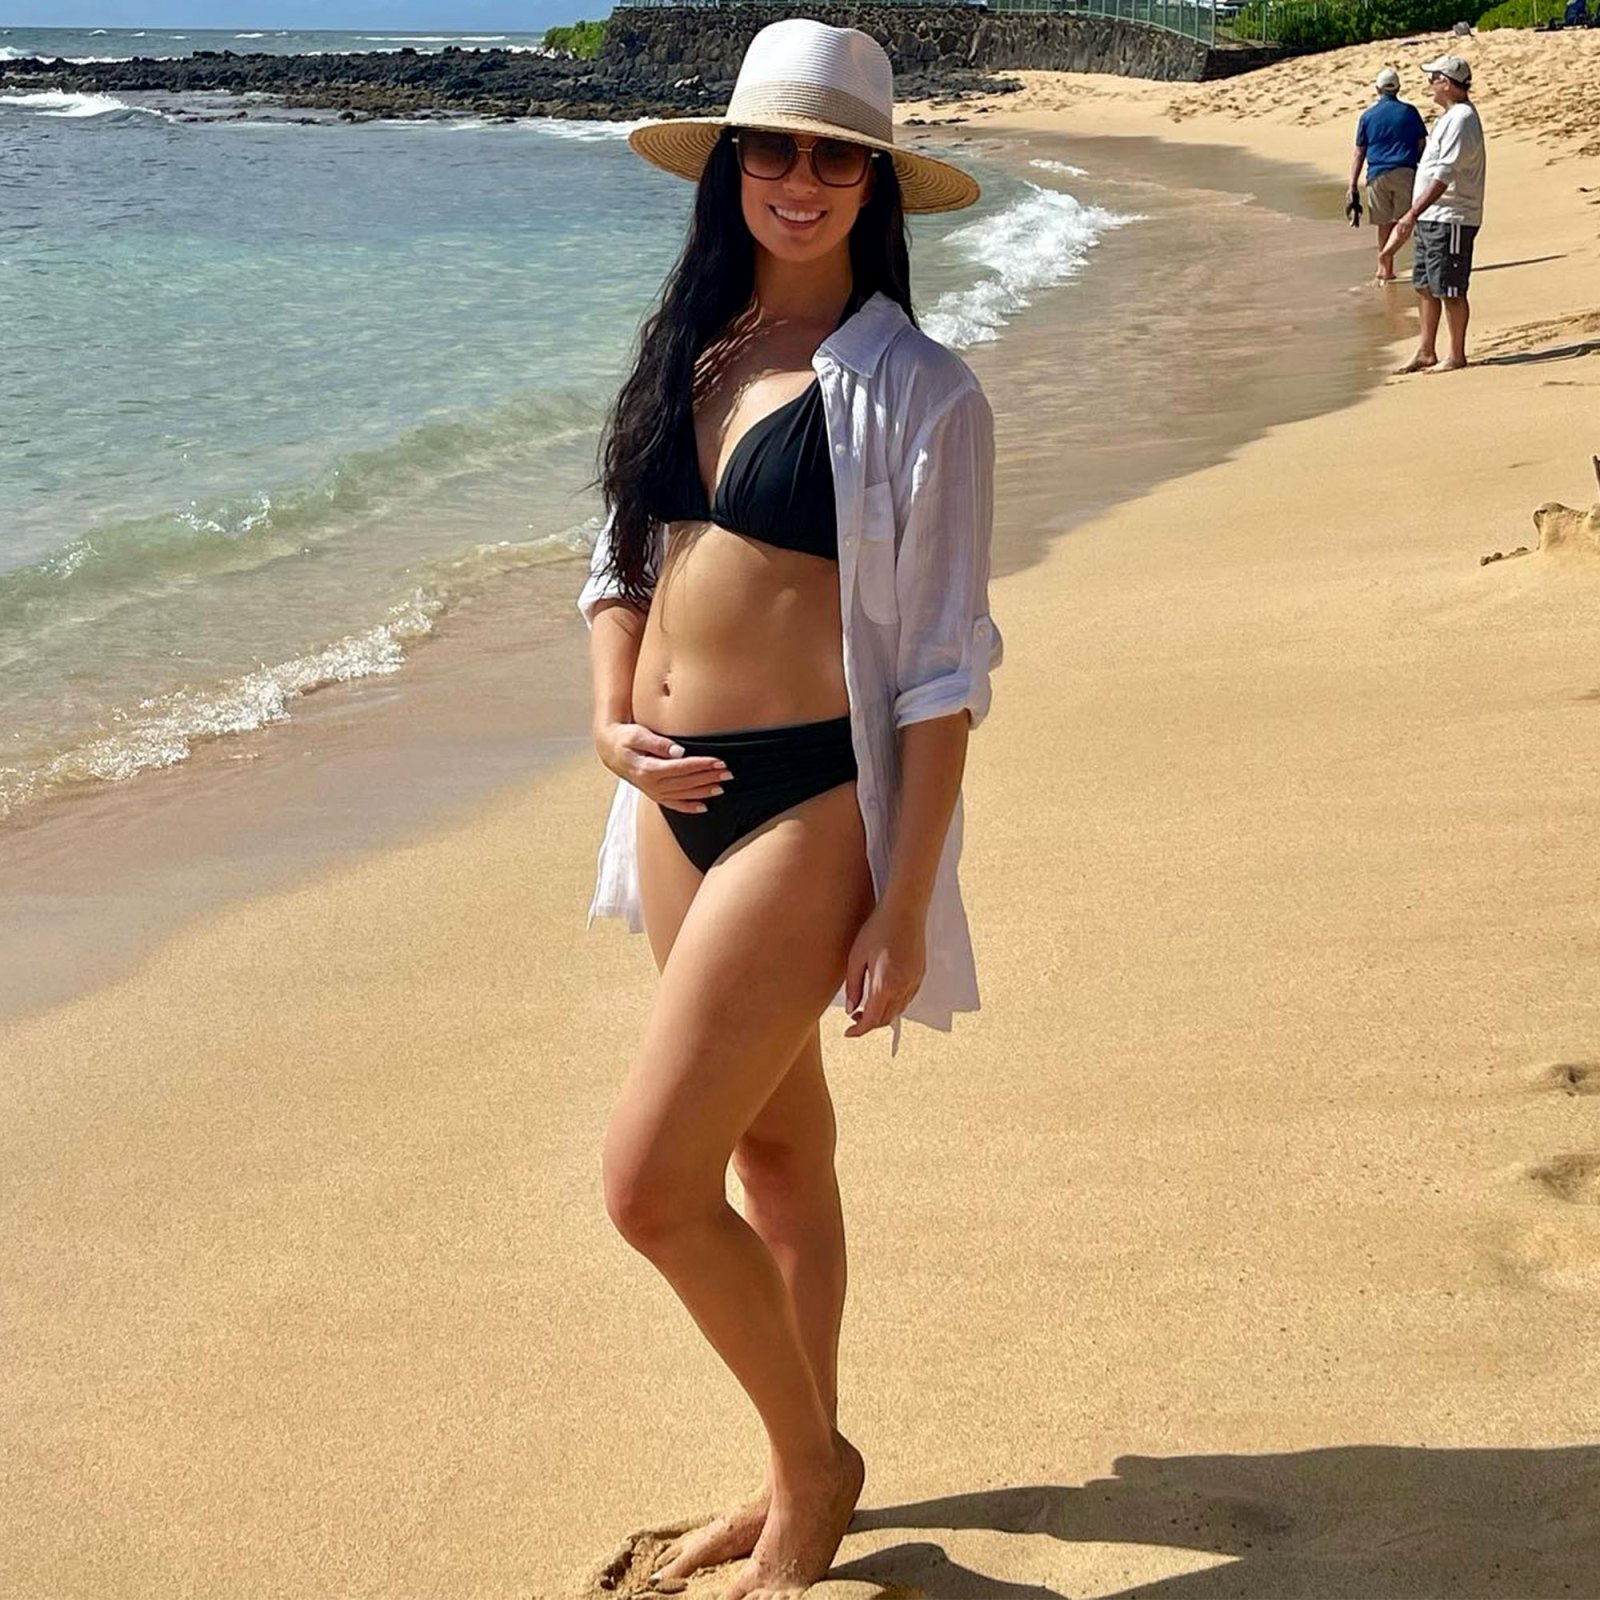 Pregnant Celebrities Showing Their Bare Bumps in Bathing Suits in 2022: Photos